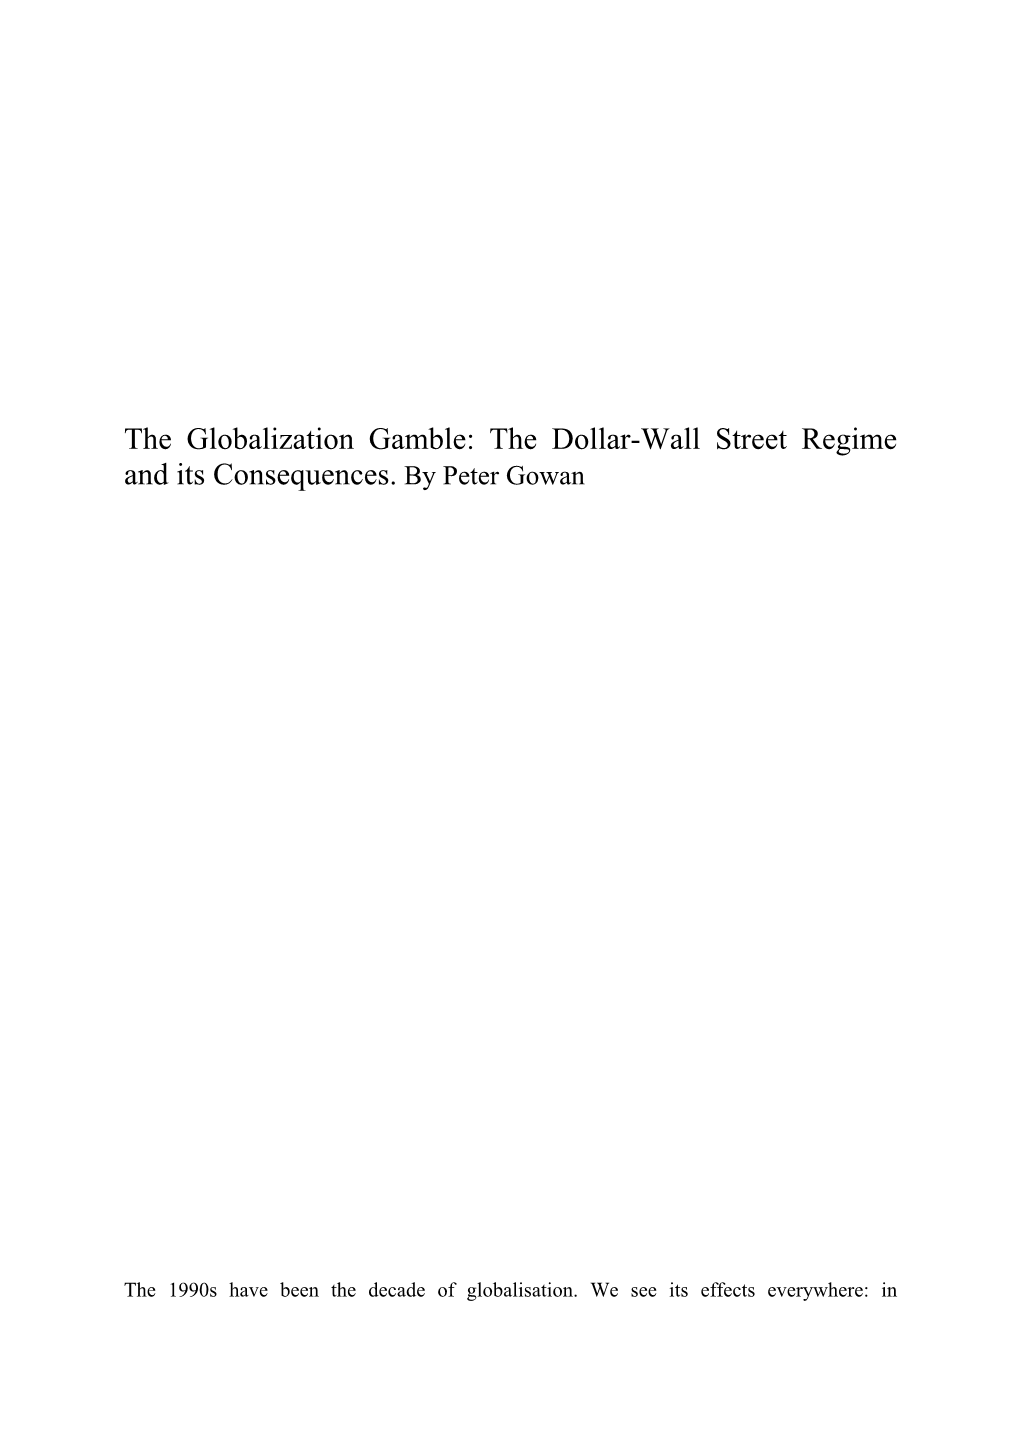 The Globalization Gamble: the Dollar-Wall Street Regime and Its Consequences